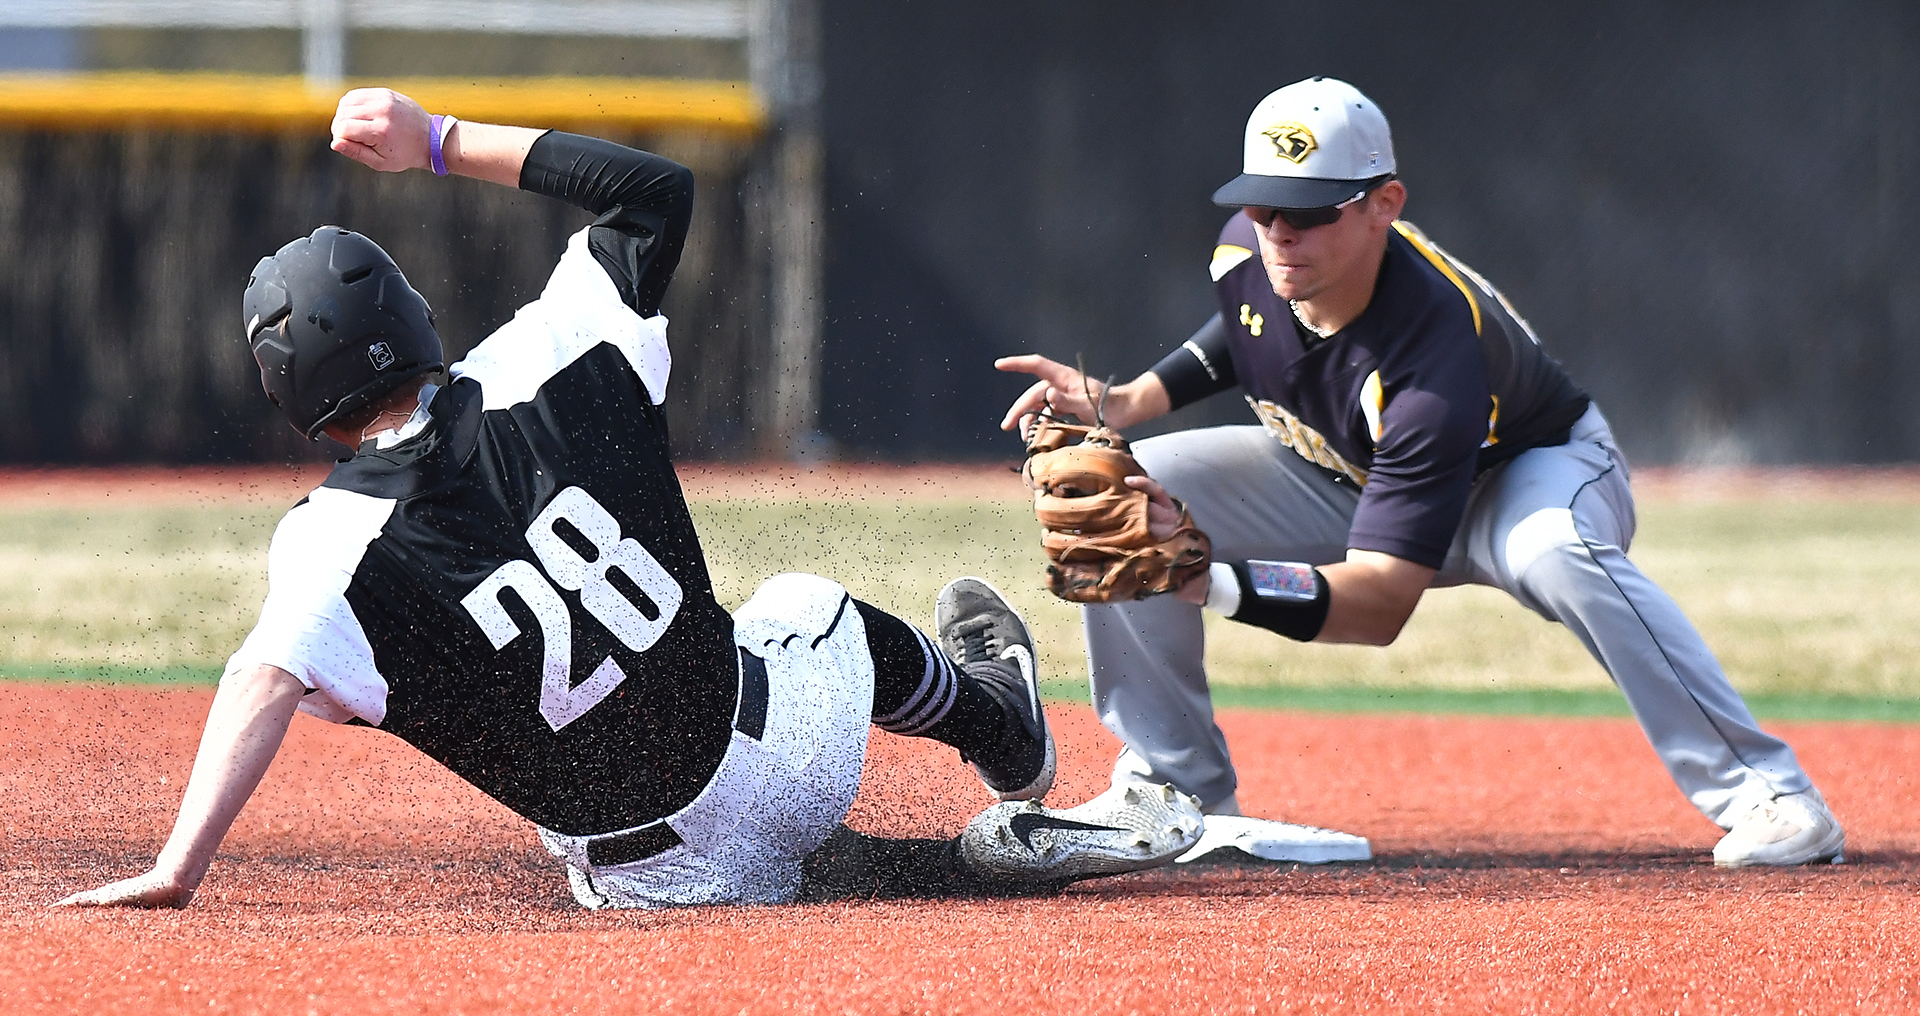 Dylan Ott places the tag on UW-Whitewater base stealer Alex Doud.